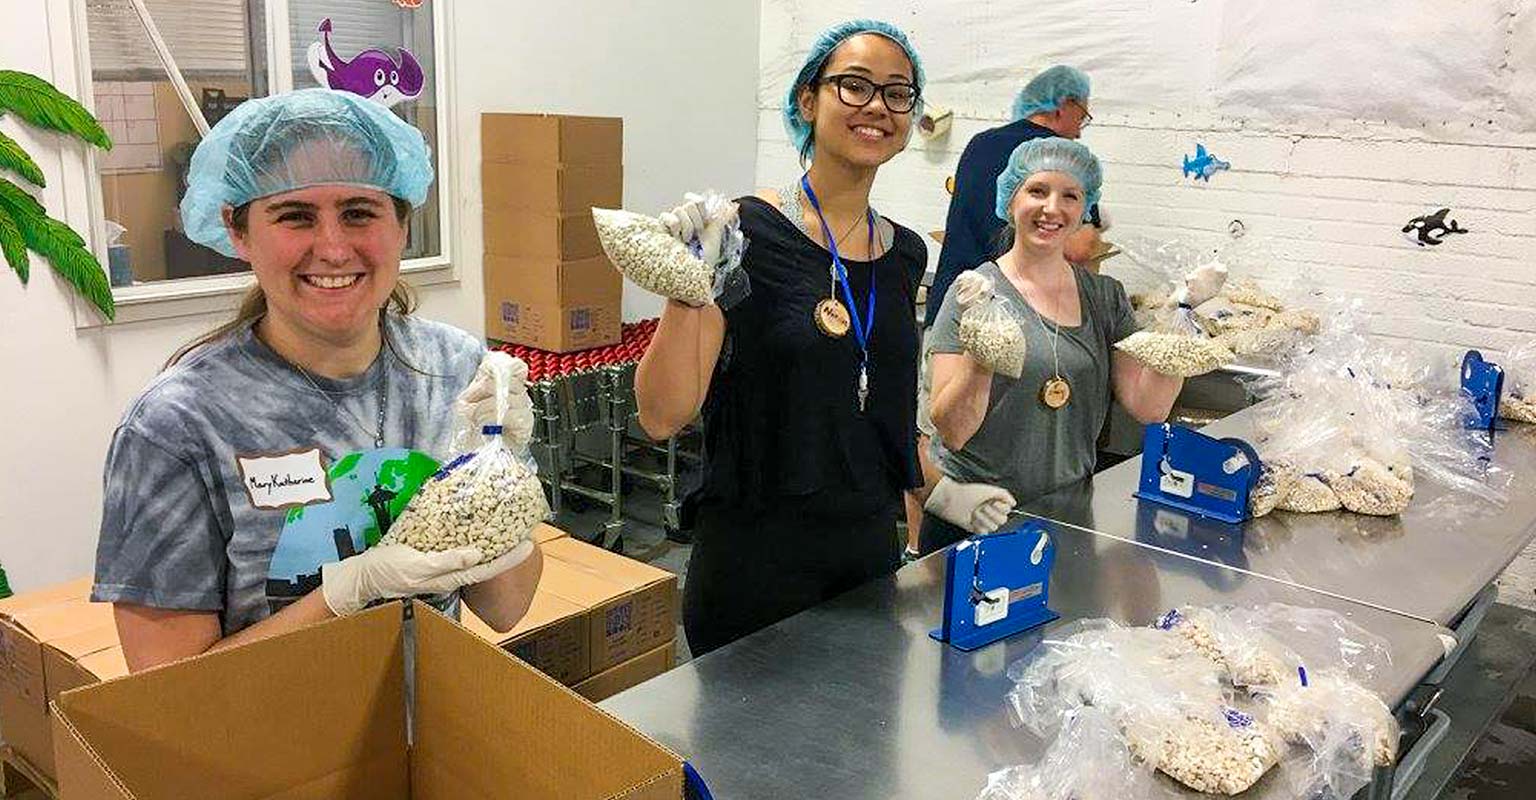 Kids packing lunches for elderly